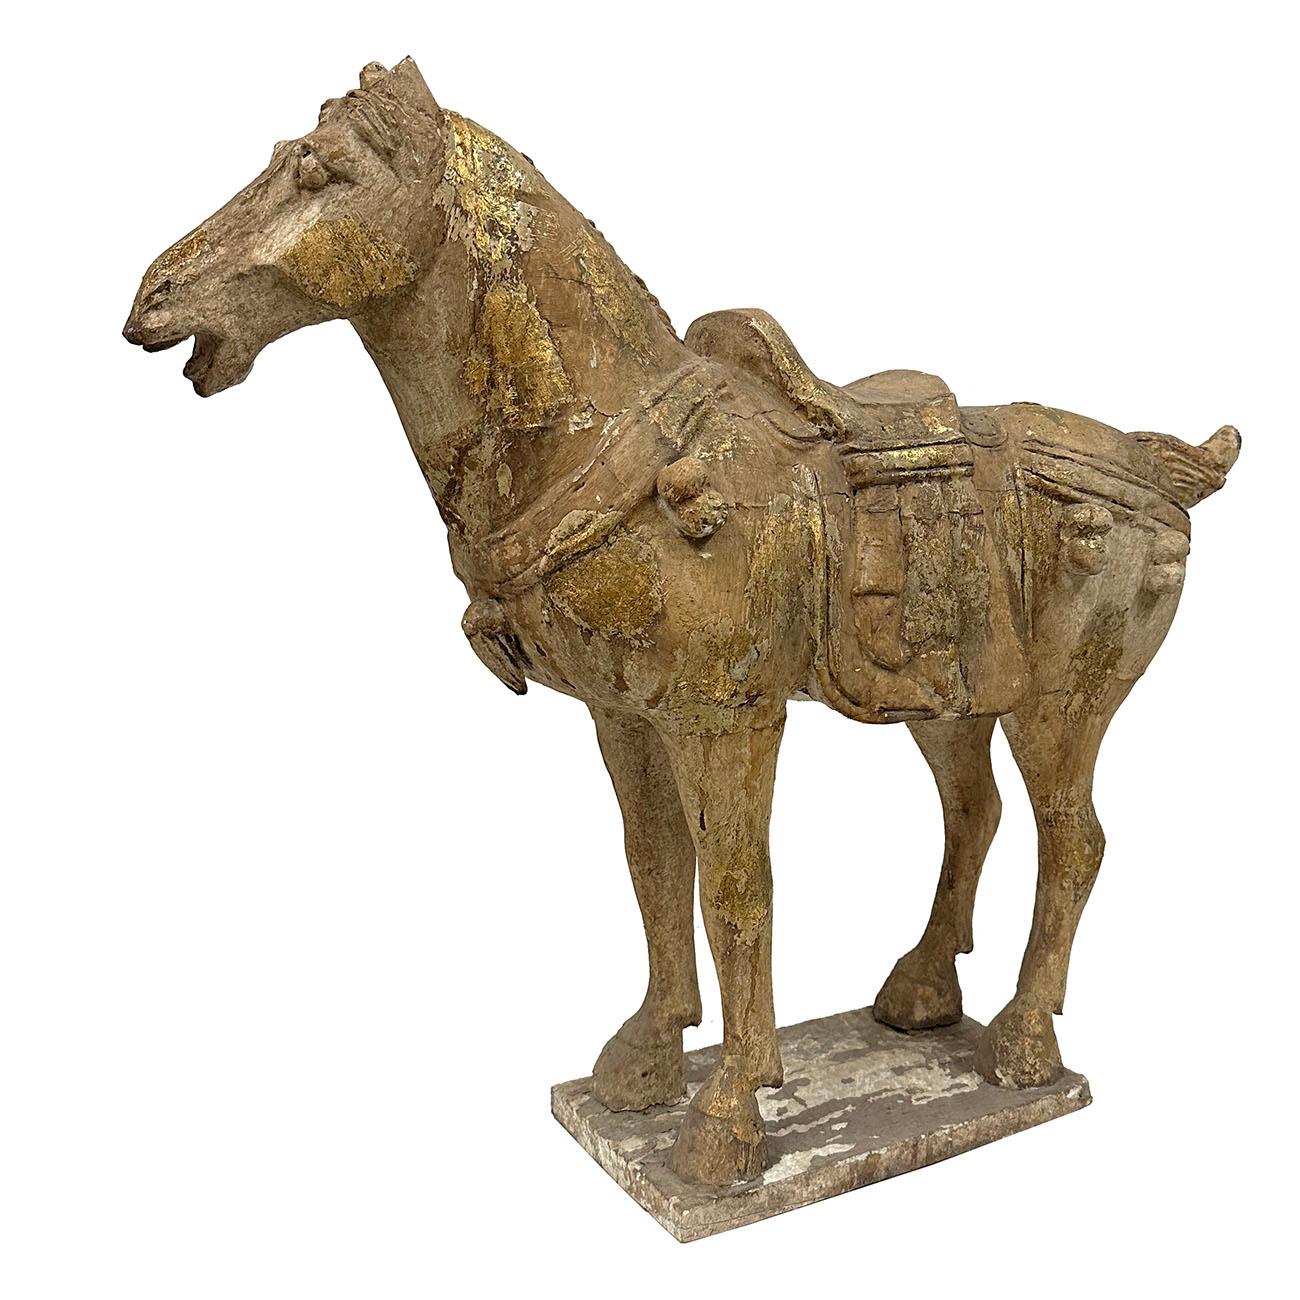 Chinese Gilt Polychrome Wooden Carved Tang Dynasty Style Horse Sculpture.  Featured nicely hand carved and hand painted with gilt highlighted on the sculpture.  From the pictures, you can see that the sculpture is hand craft with exquisite detail